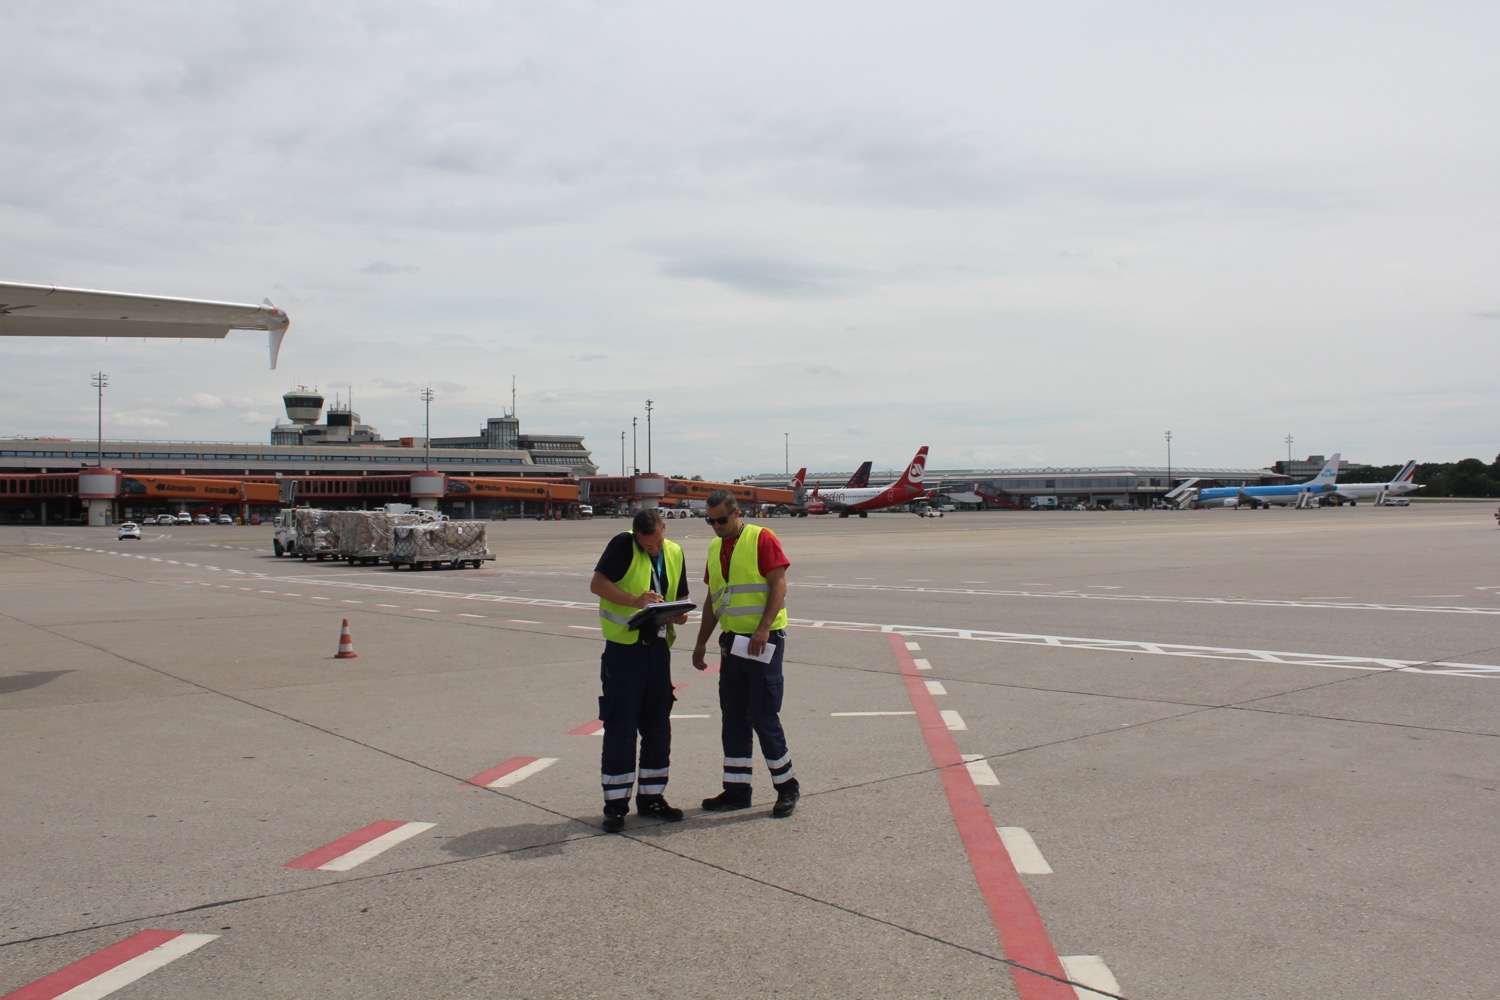 two men in reflective vests standing on a runway